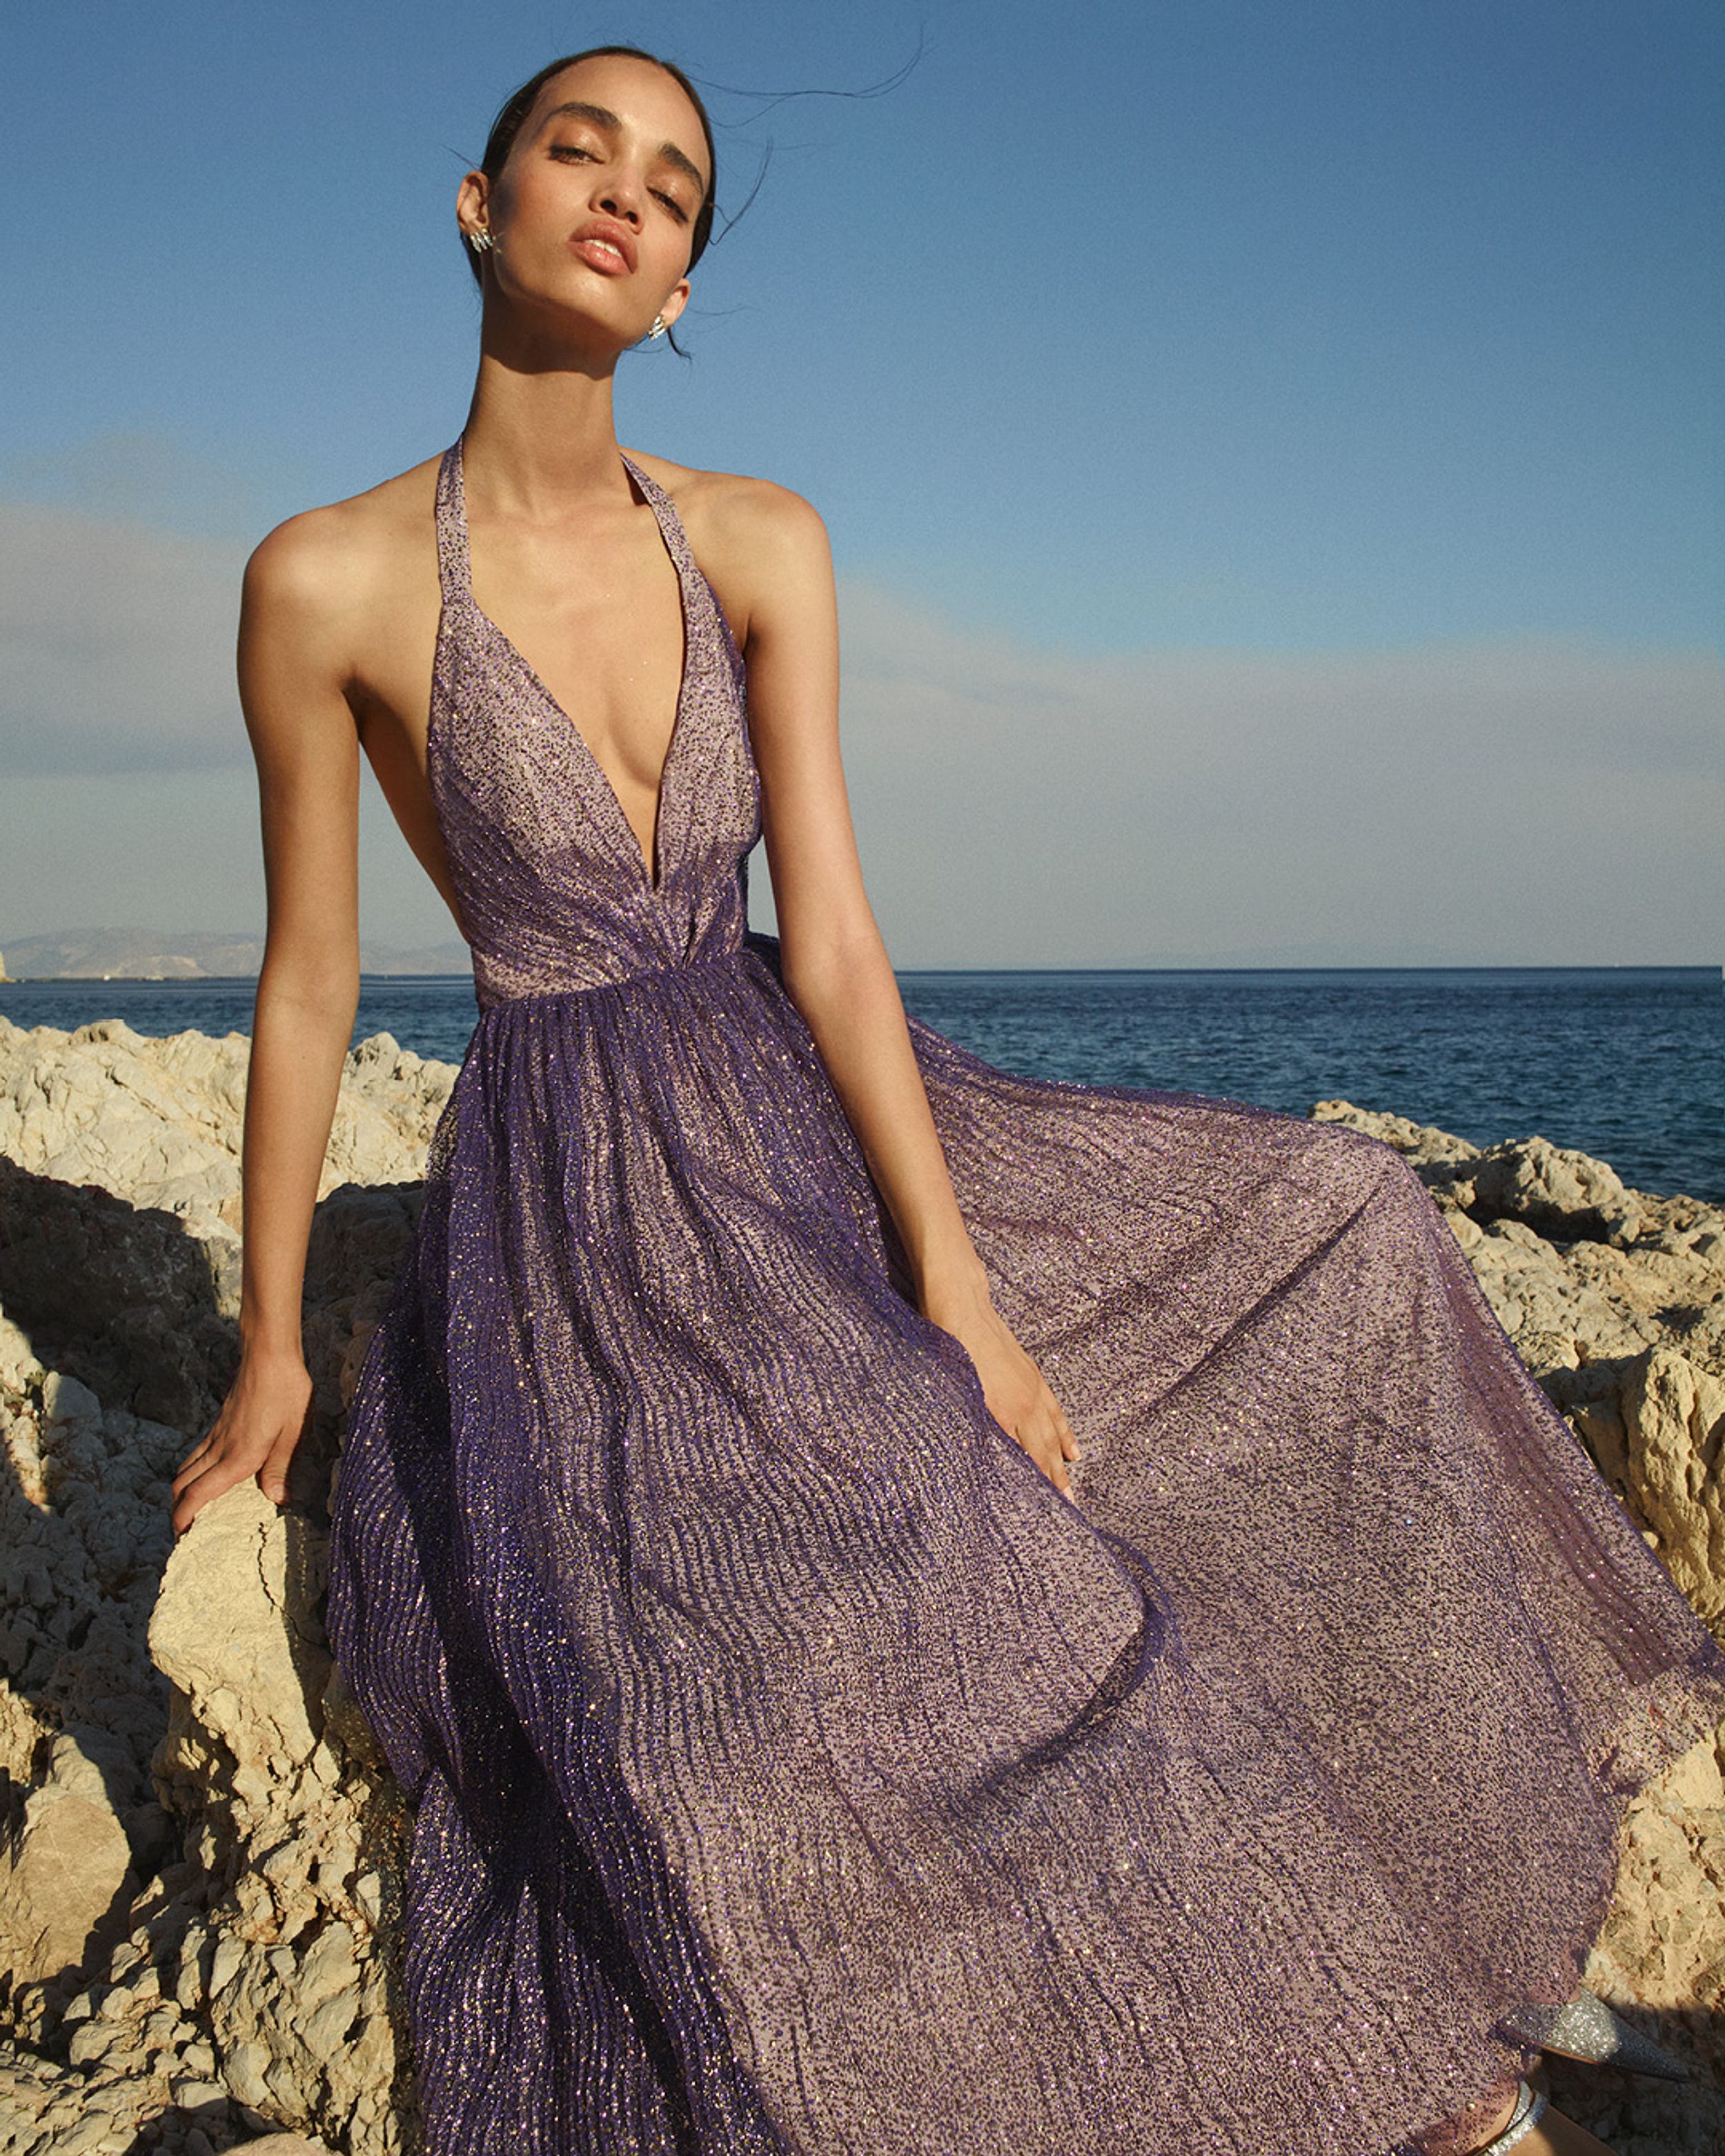 Model wearing a purple sparkly tulle gown leaning on rocks with the ocean in the background